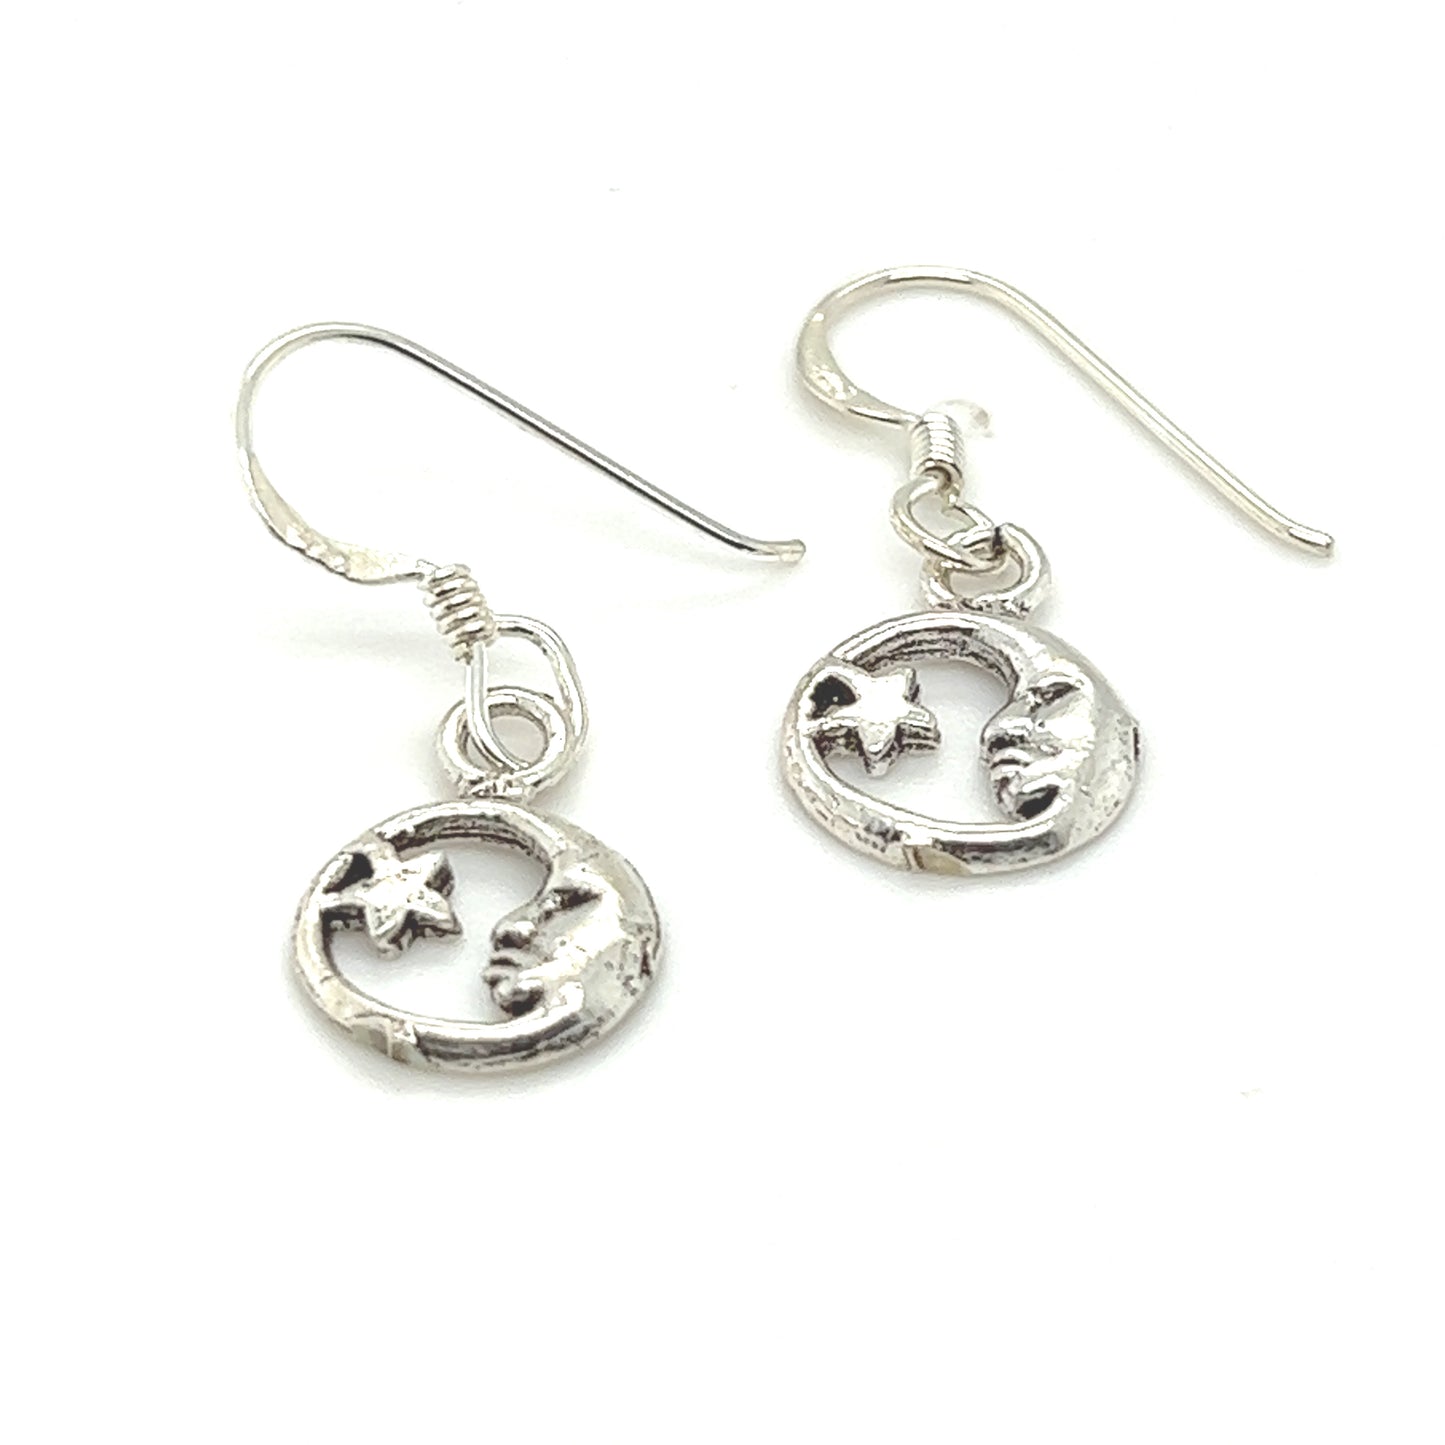 Super Silver presents the Dainty Crescent Moon and Star Earrings with a moon and star design.